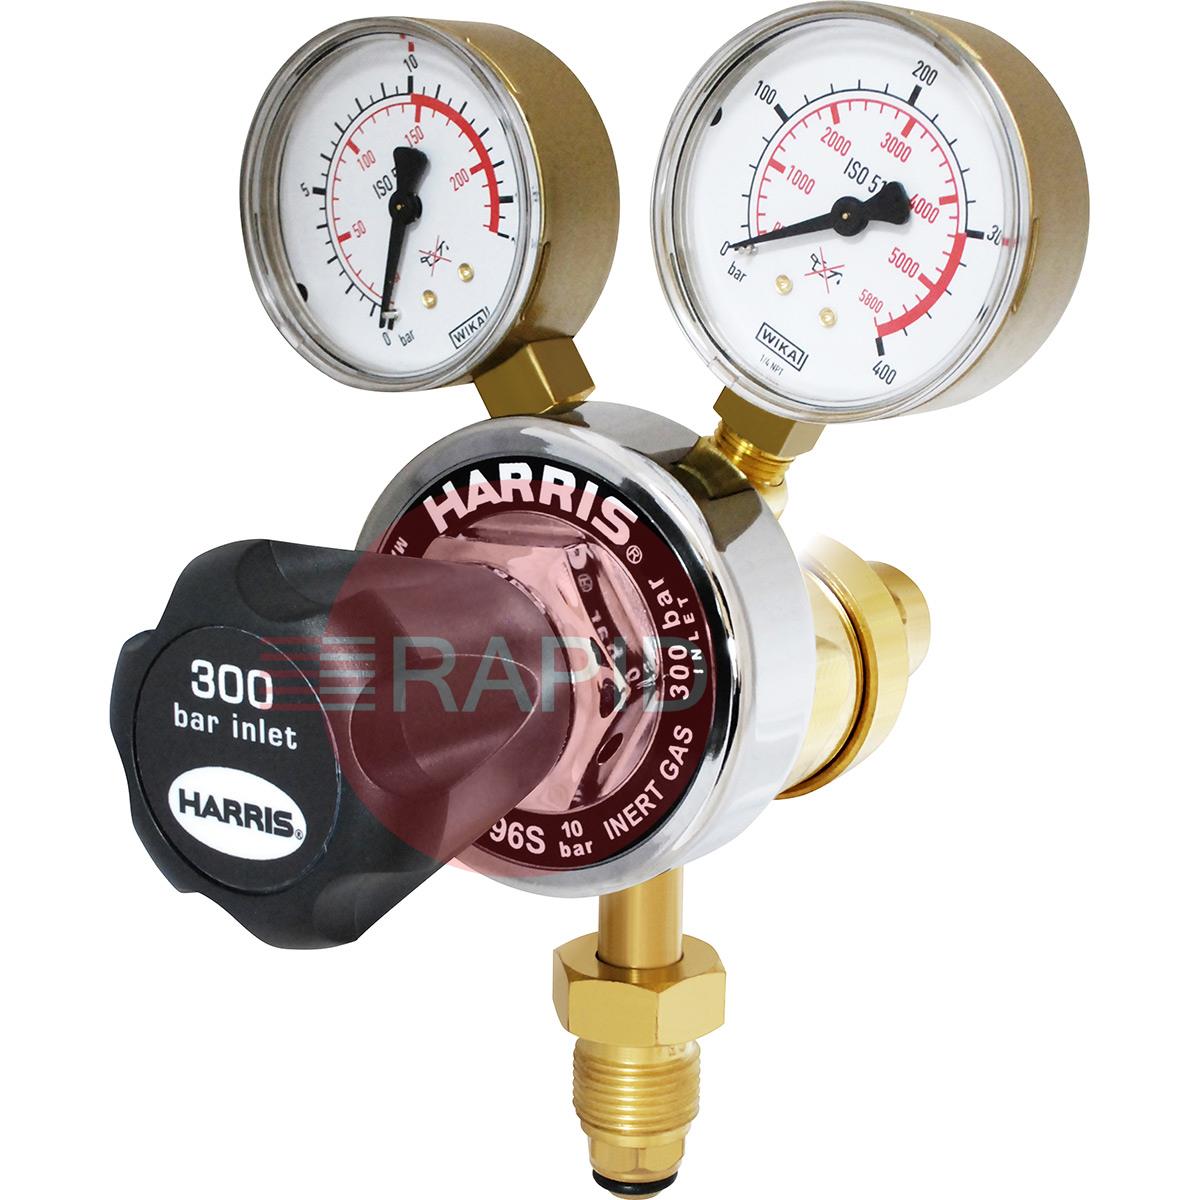 H1054  Harris Inert Gas 996 Two Stage Two Gauge Regulator 15.0 bar, 5/8 BSP RH Cylinder Connection, 3/8 BSP Outlet, UK Fitting Only